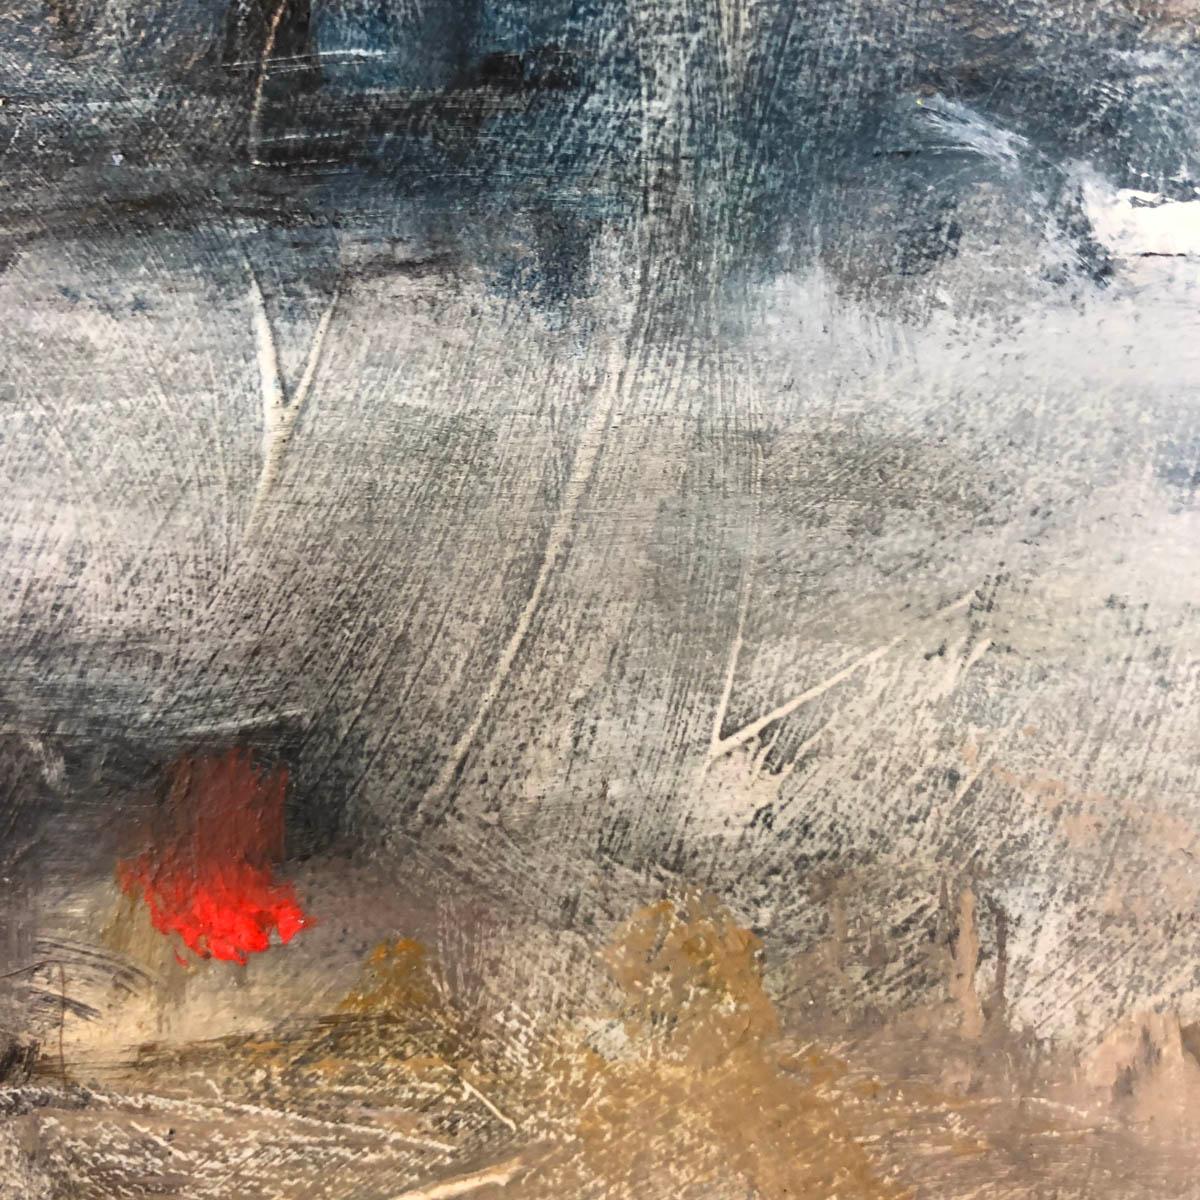 Jemma Powell, Red Buoy in Storm, Original Seascape Art, Turner-esque Painting  3